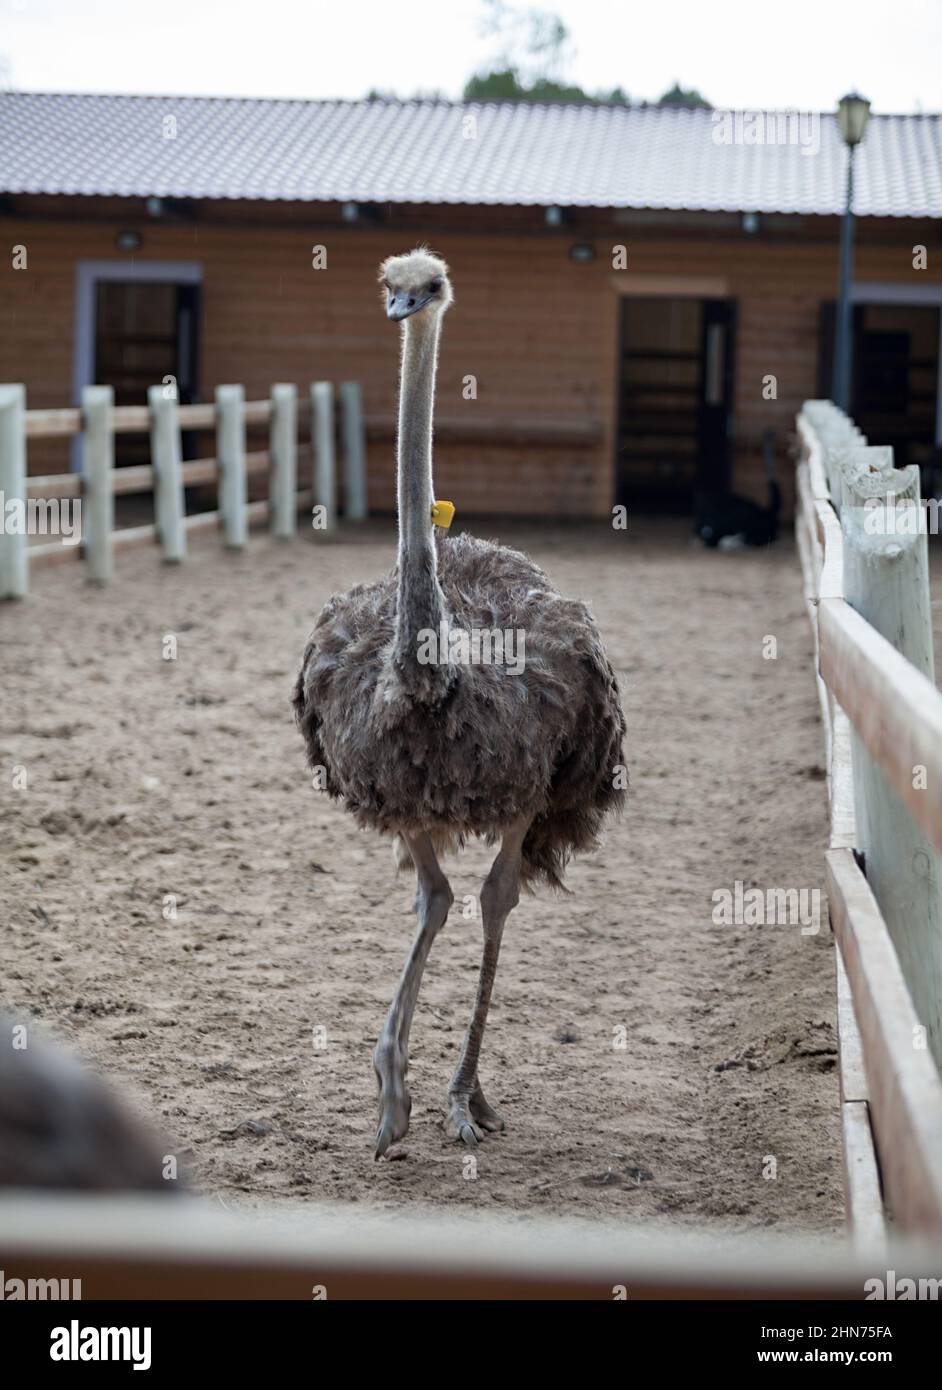 Ostrich standing on sandy earth in a poultry farm, wooden fences and barn Stock Photo